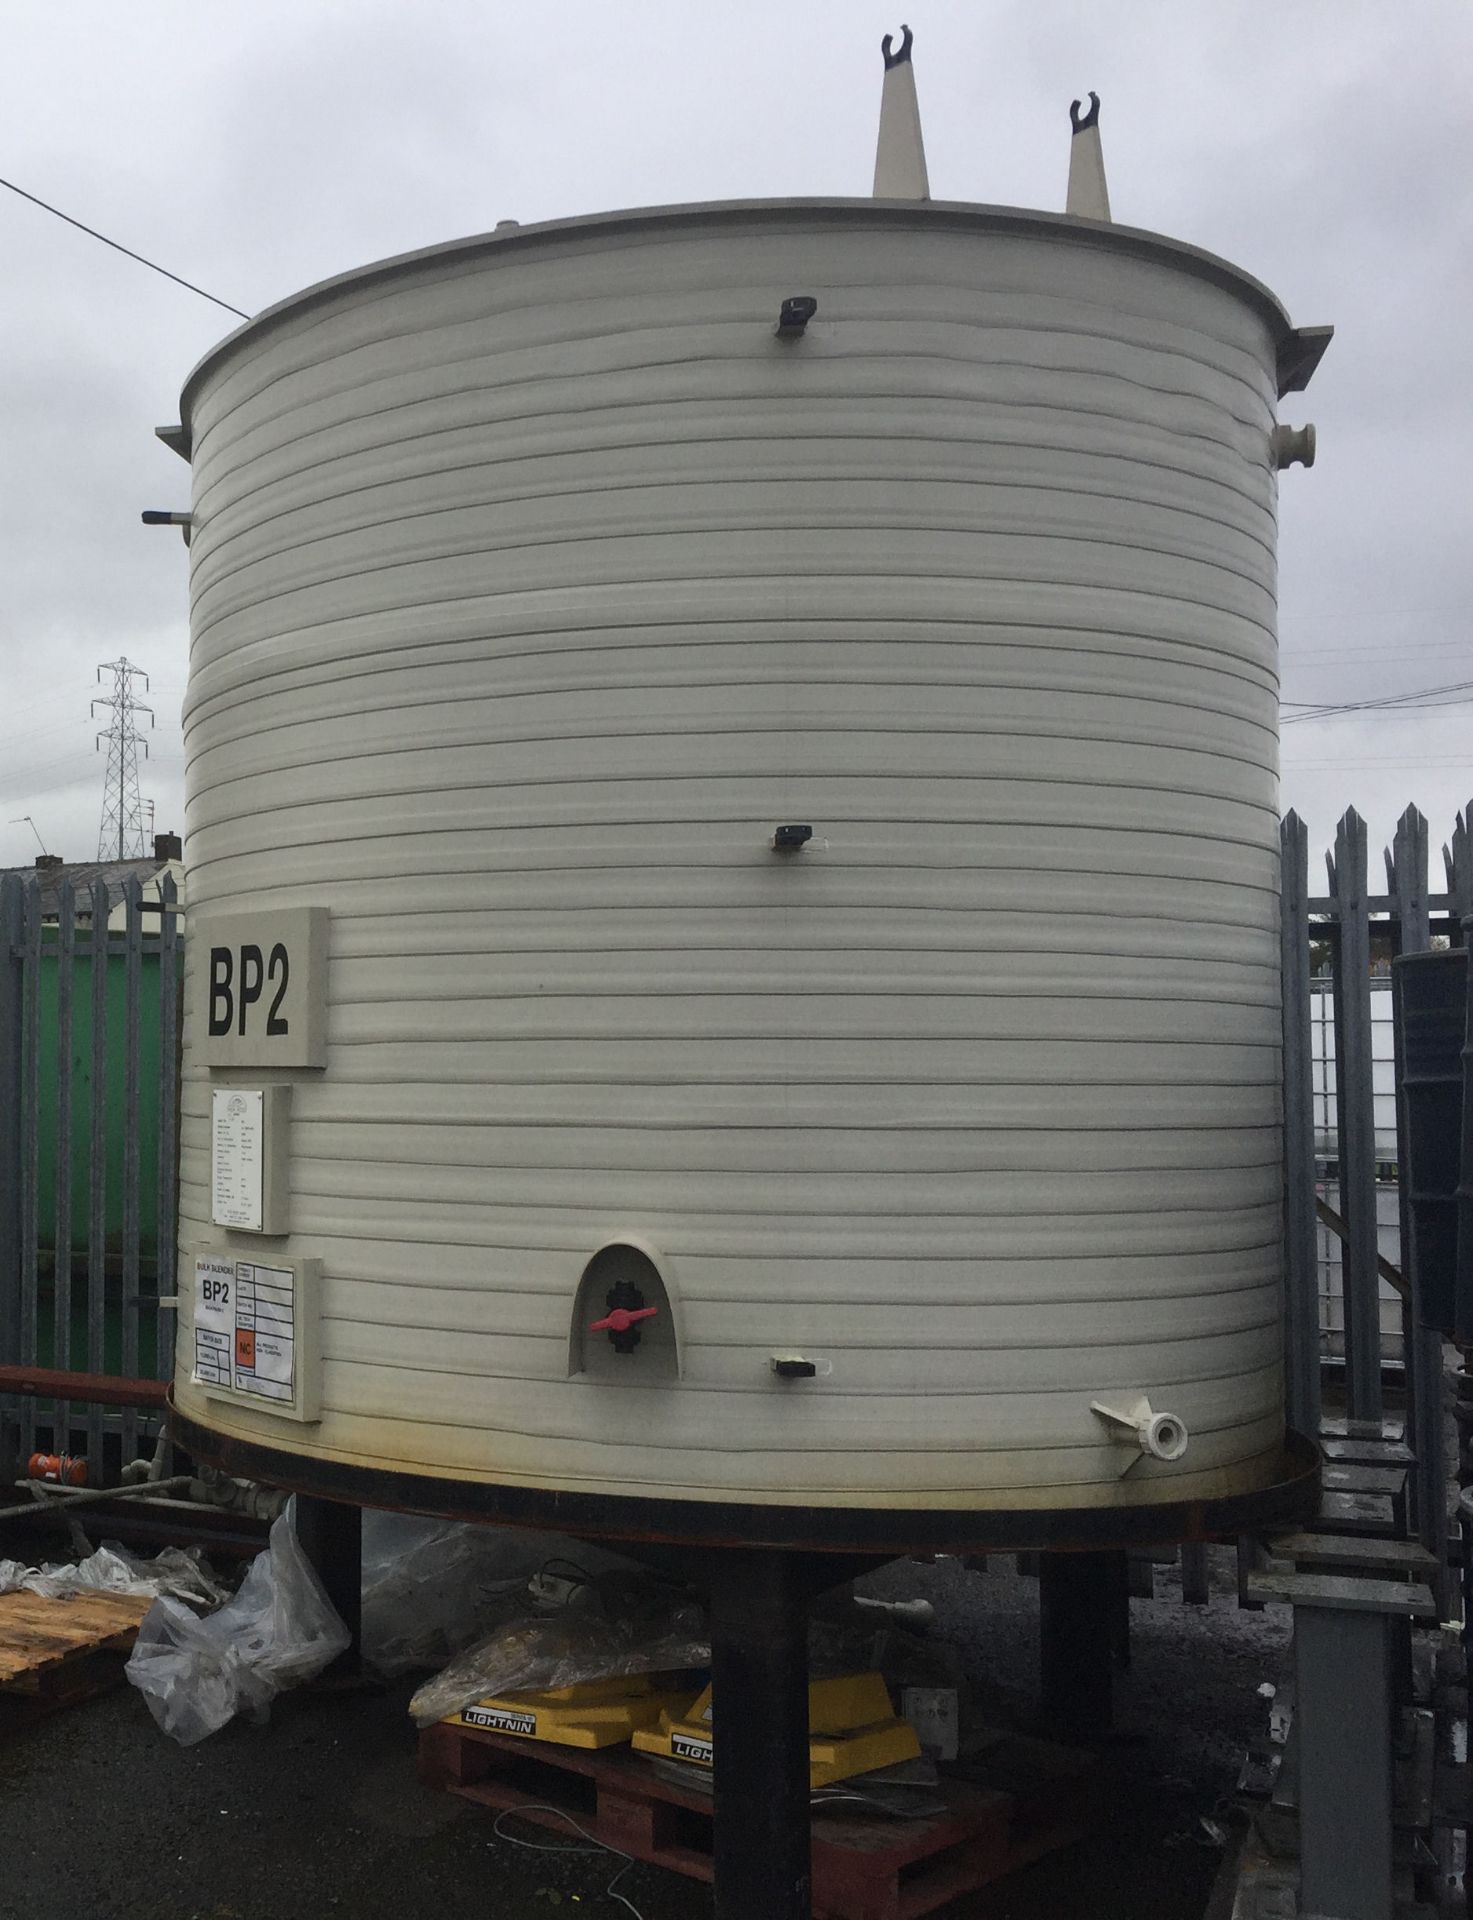 1 x BP2 12,000 Litre Polypropylene Chem Resist Tank - Location: Oldham Has been used for polish sol